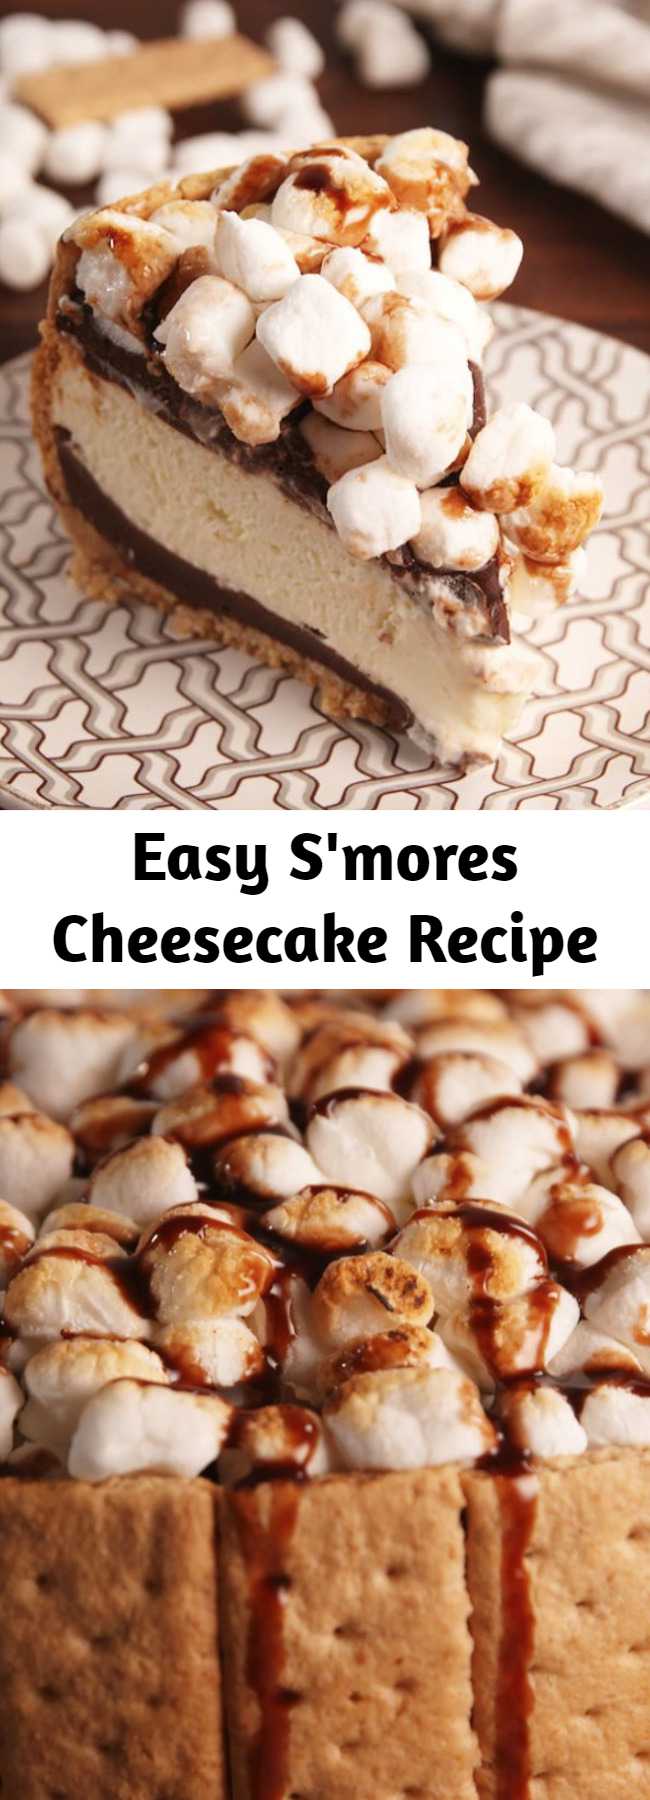 Easy S'mores Cheesecake Recipe - S'mores make everything better, even cheesecake. Take the camping party indoors with this s'mores cheesecake.